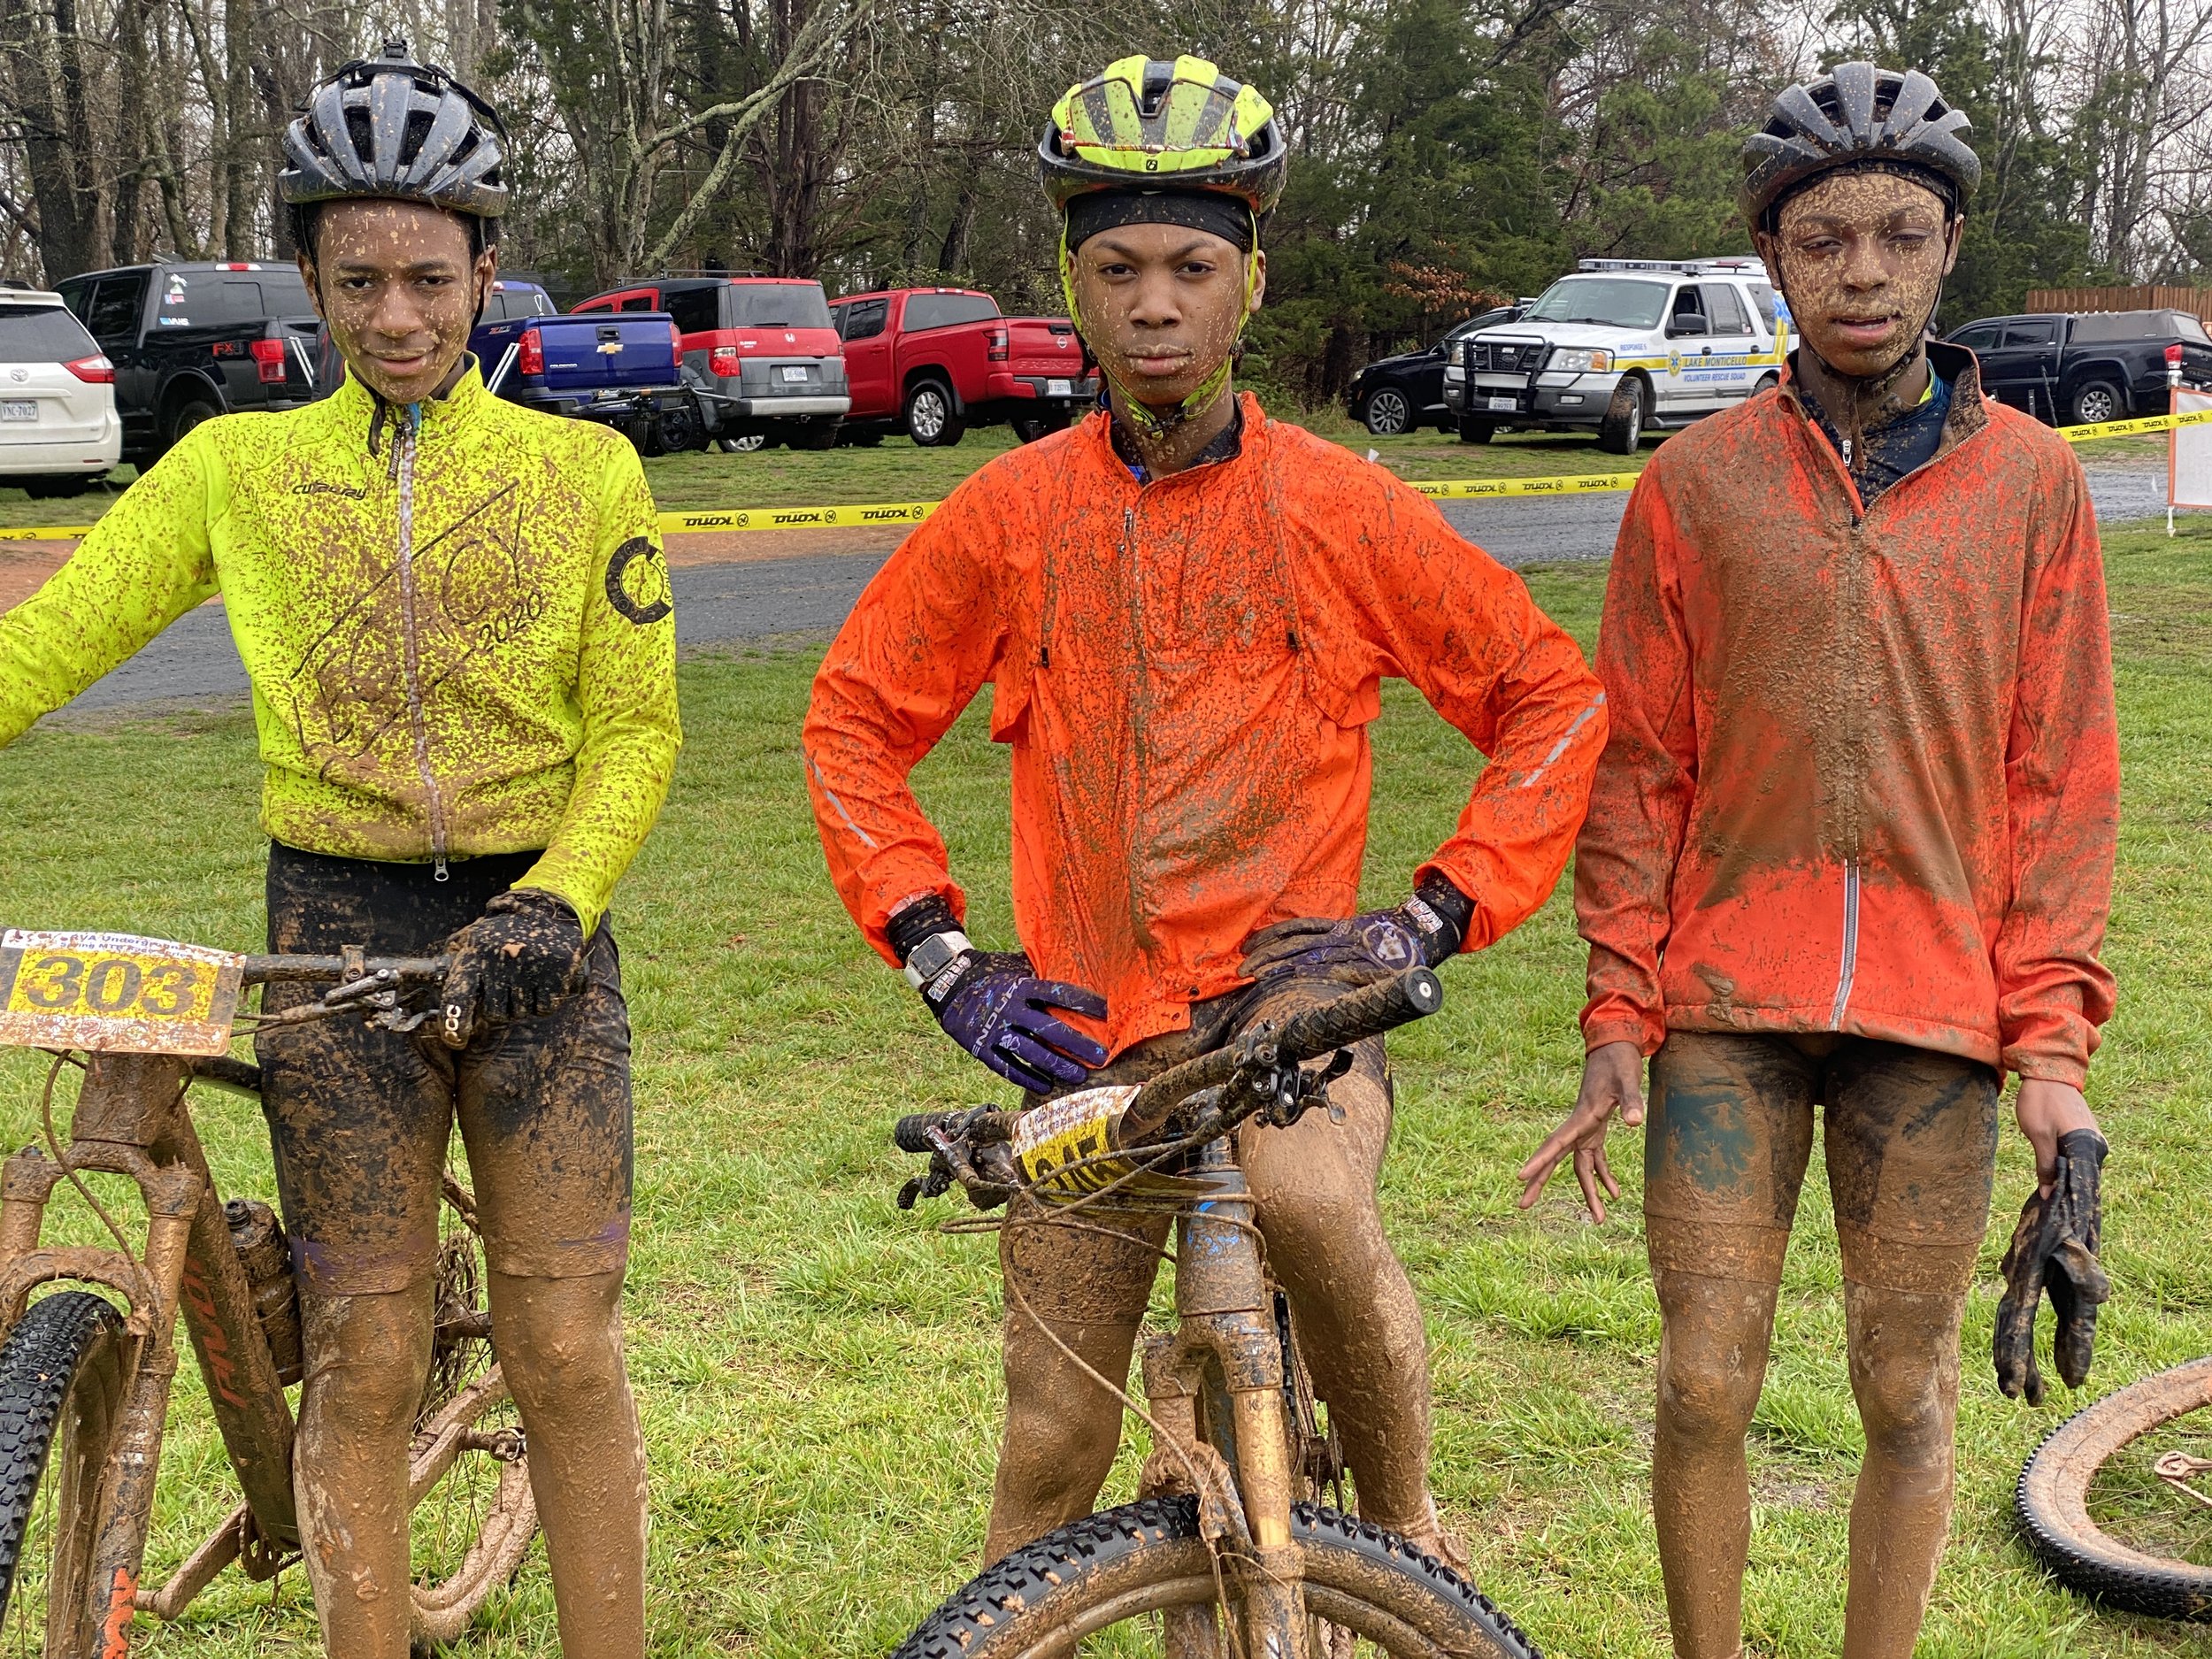 A muddy but cheery group